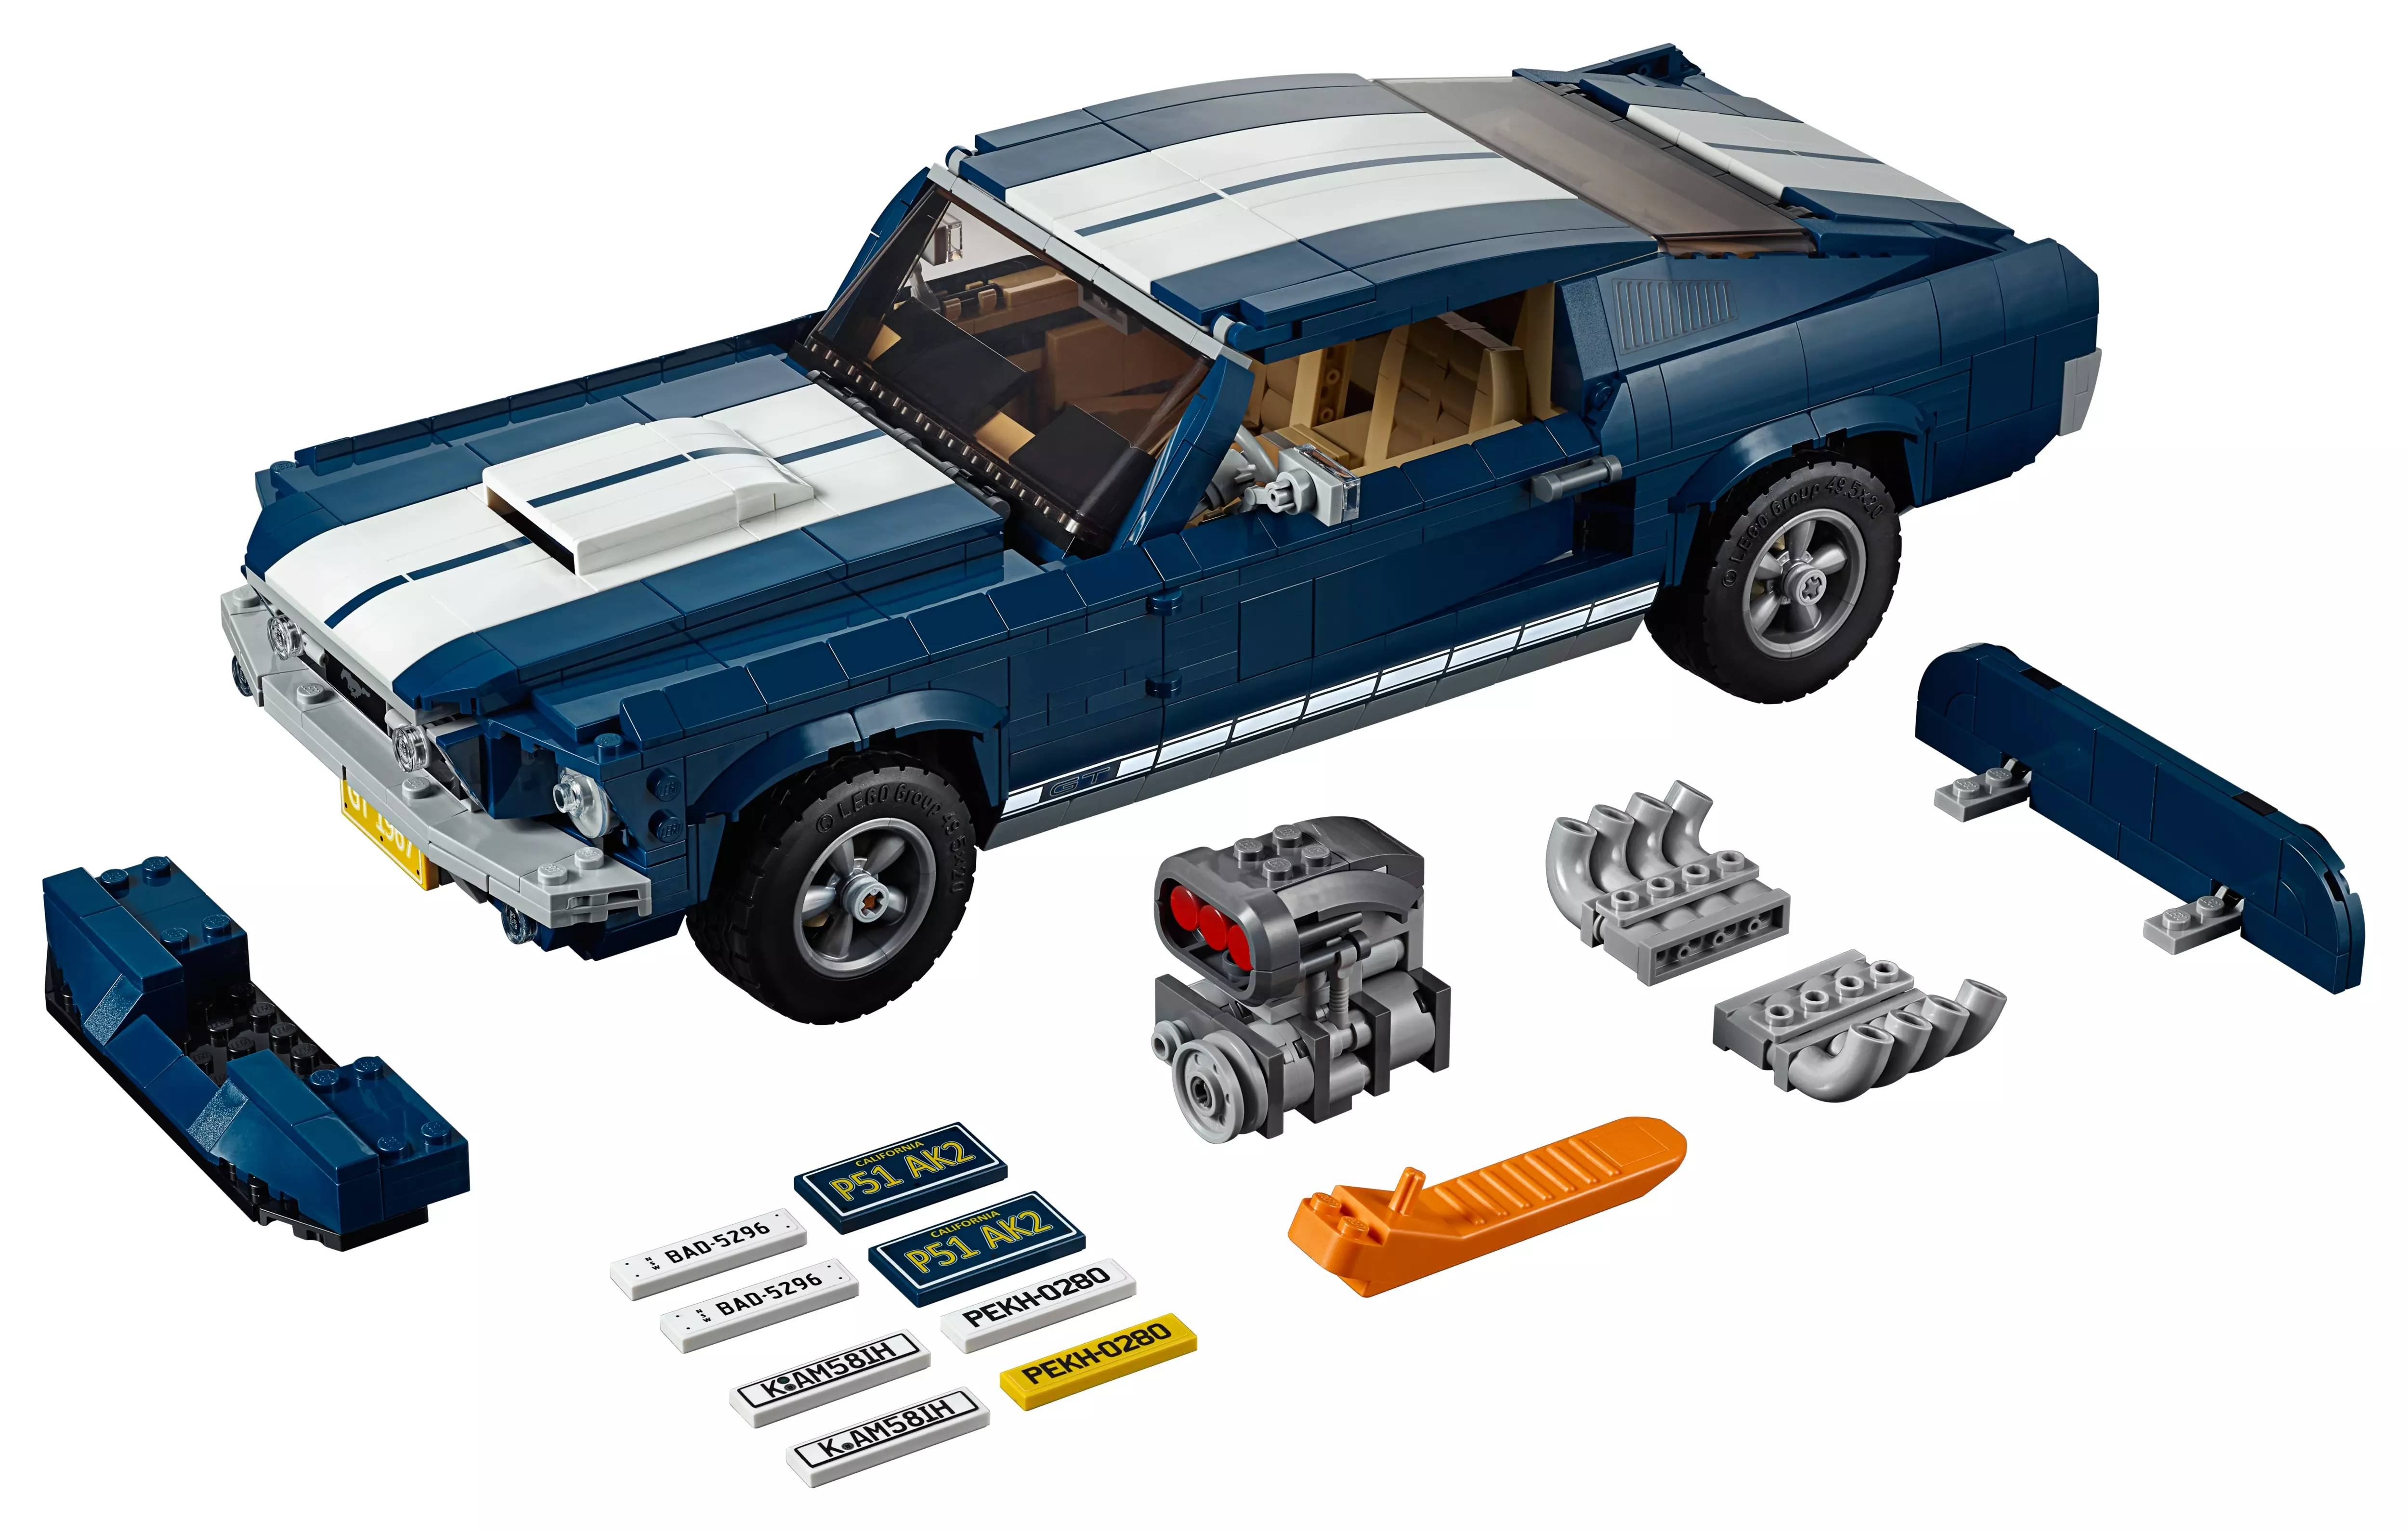 Lego Creator Expert Ford Mustang Building Kit